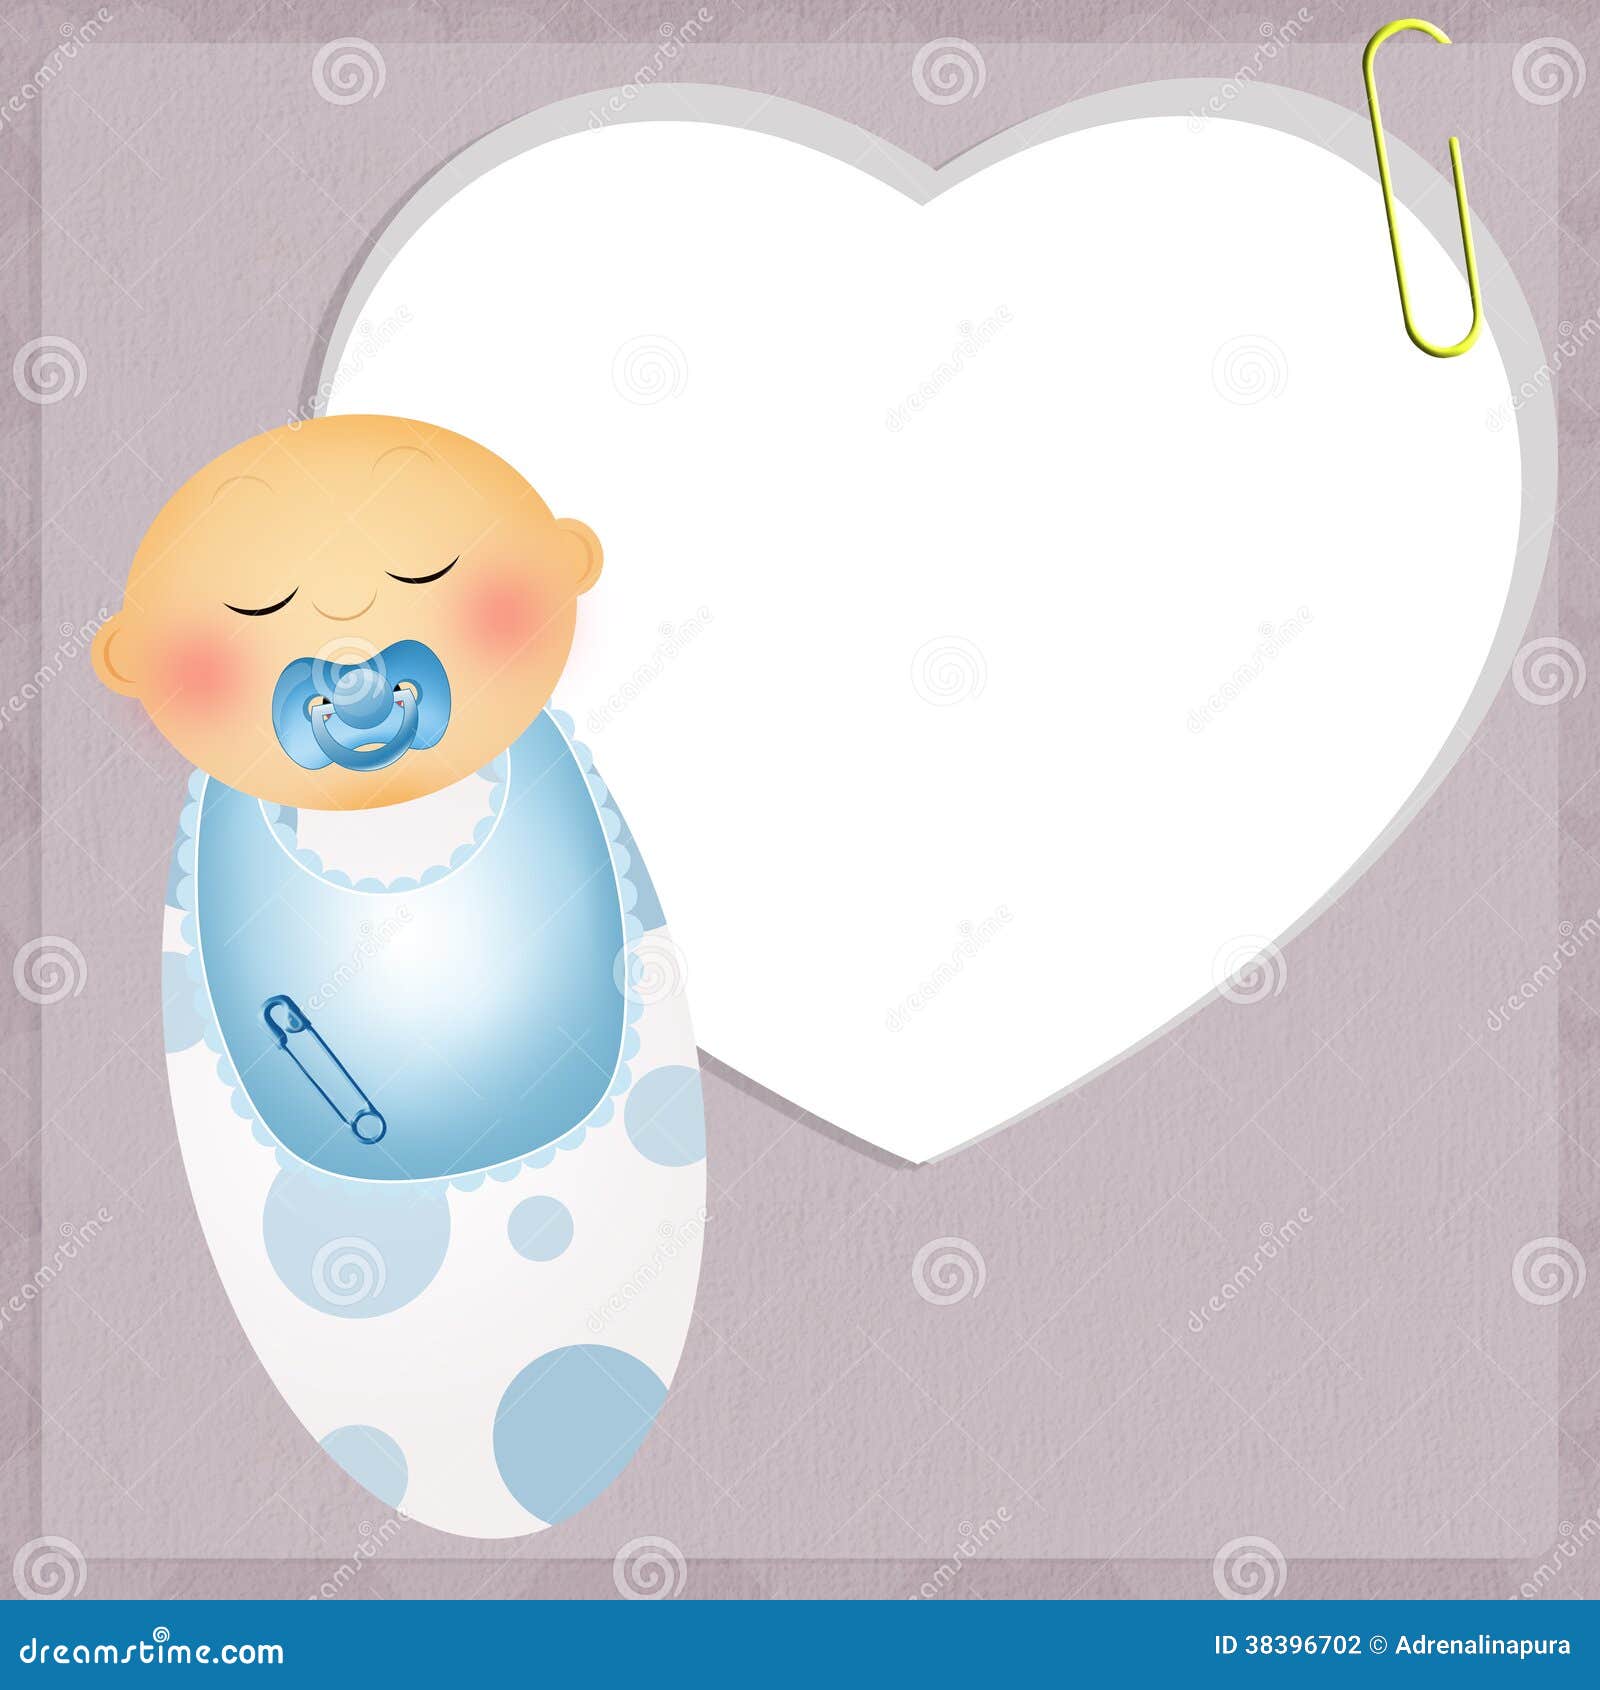 congratulations new baby clipart free - photo #25